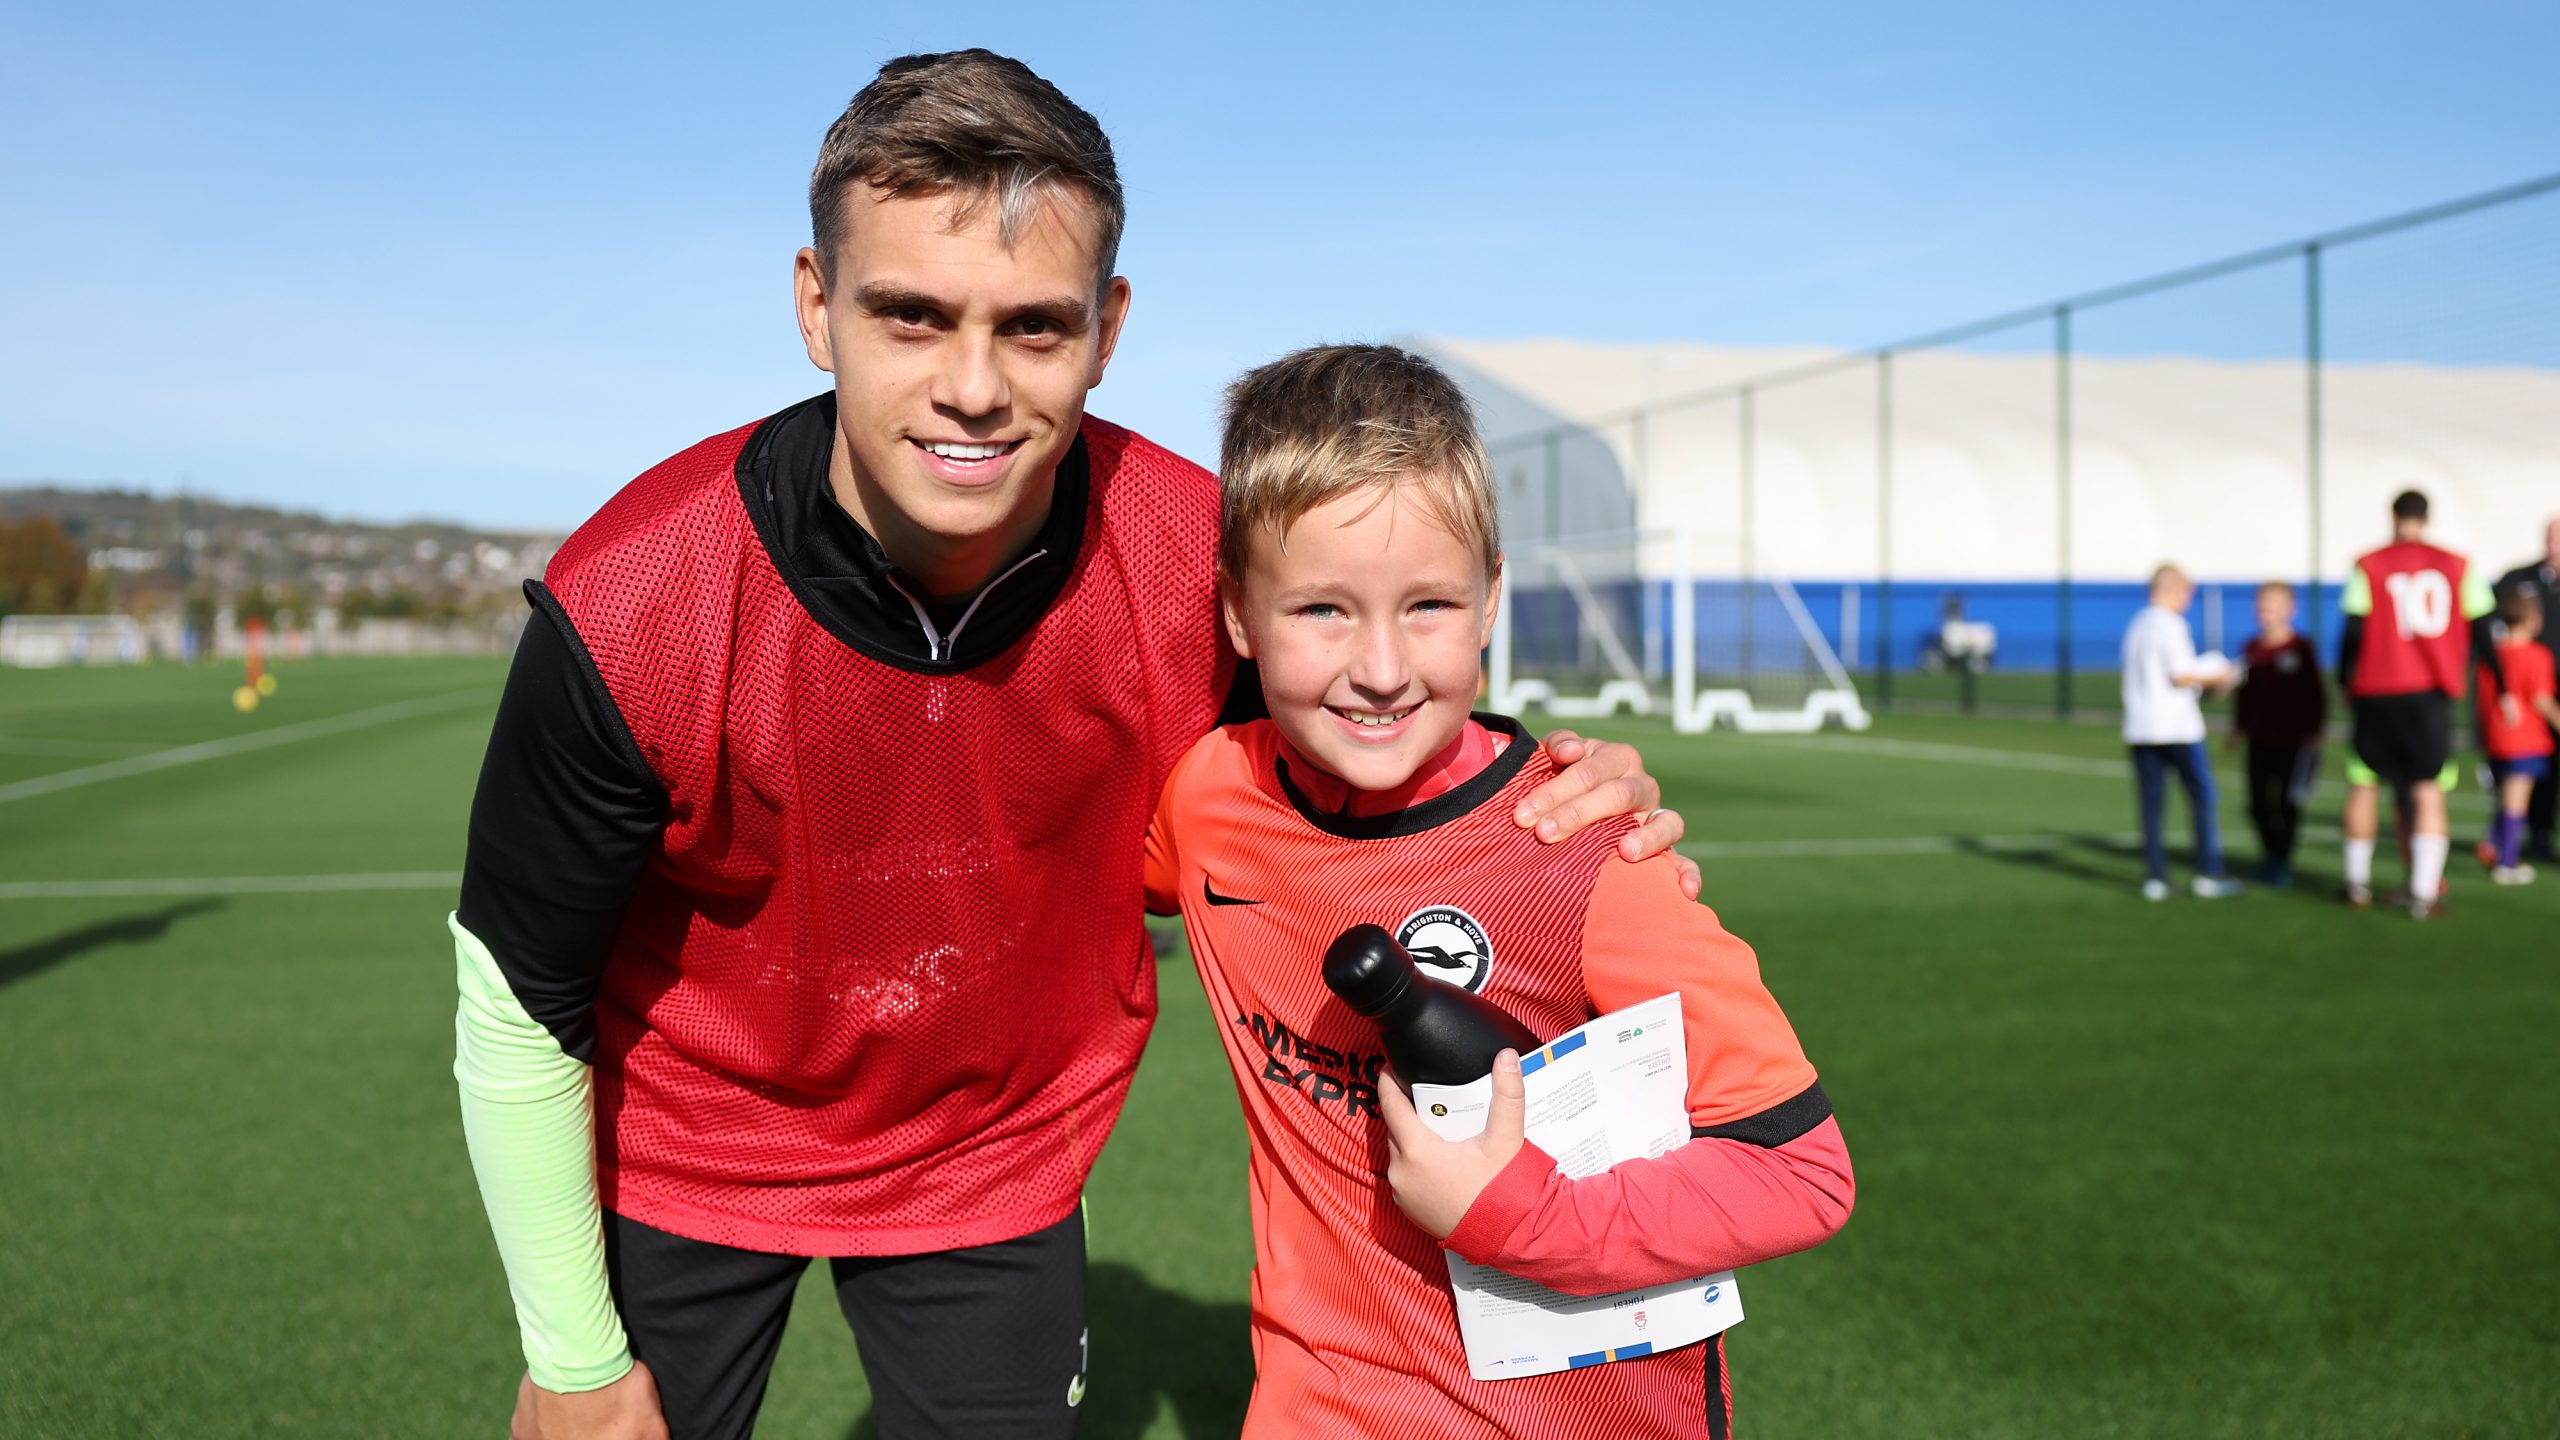 Young Ukrainians meet their Albion heroes